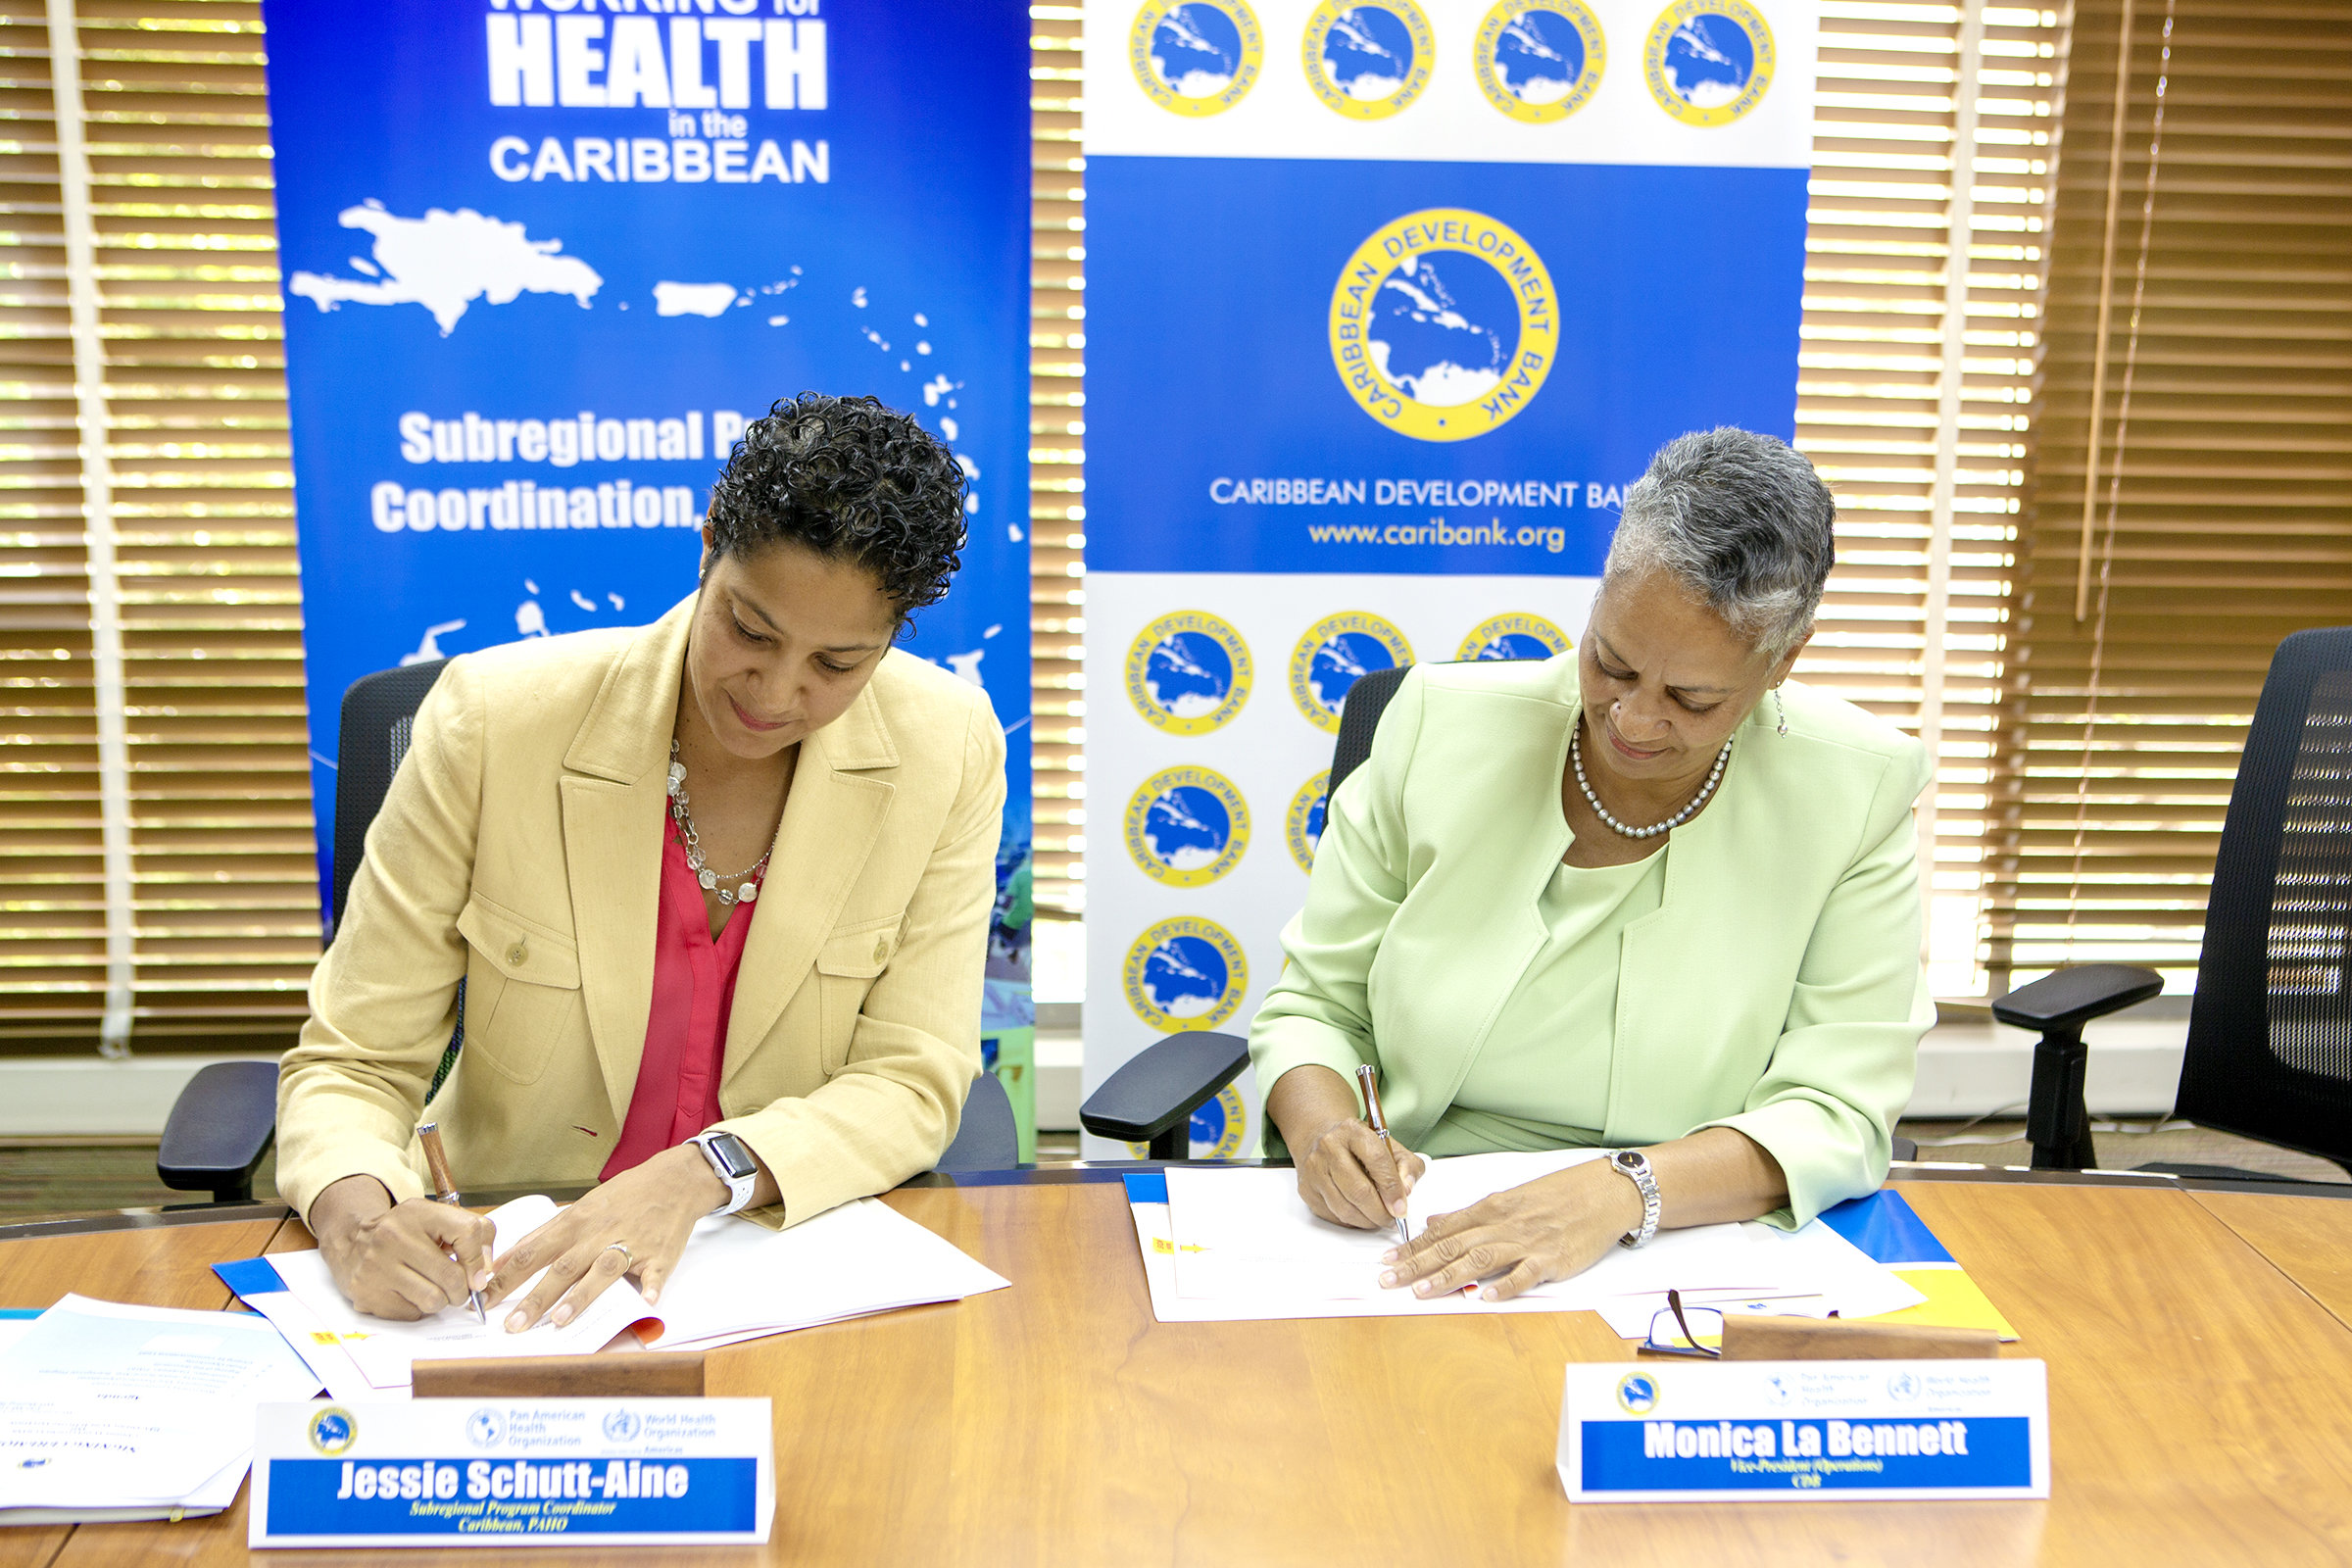 Jesse Schutt Aine (left), Subregional Program Coordinator, Caribbean, PAHO and Monica La Bennett (right), Vice-President (Operations), CDB, sign the agreement to enhance capacity for mental health and psychosocial support in disaster management in the Caribbean. The signing took place on June 13, 2018, at CDB’s headquarters in Barbados.